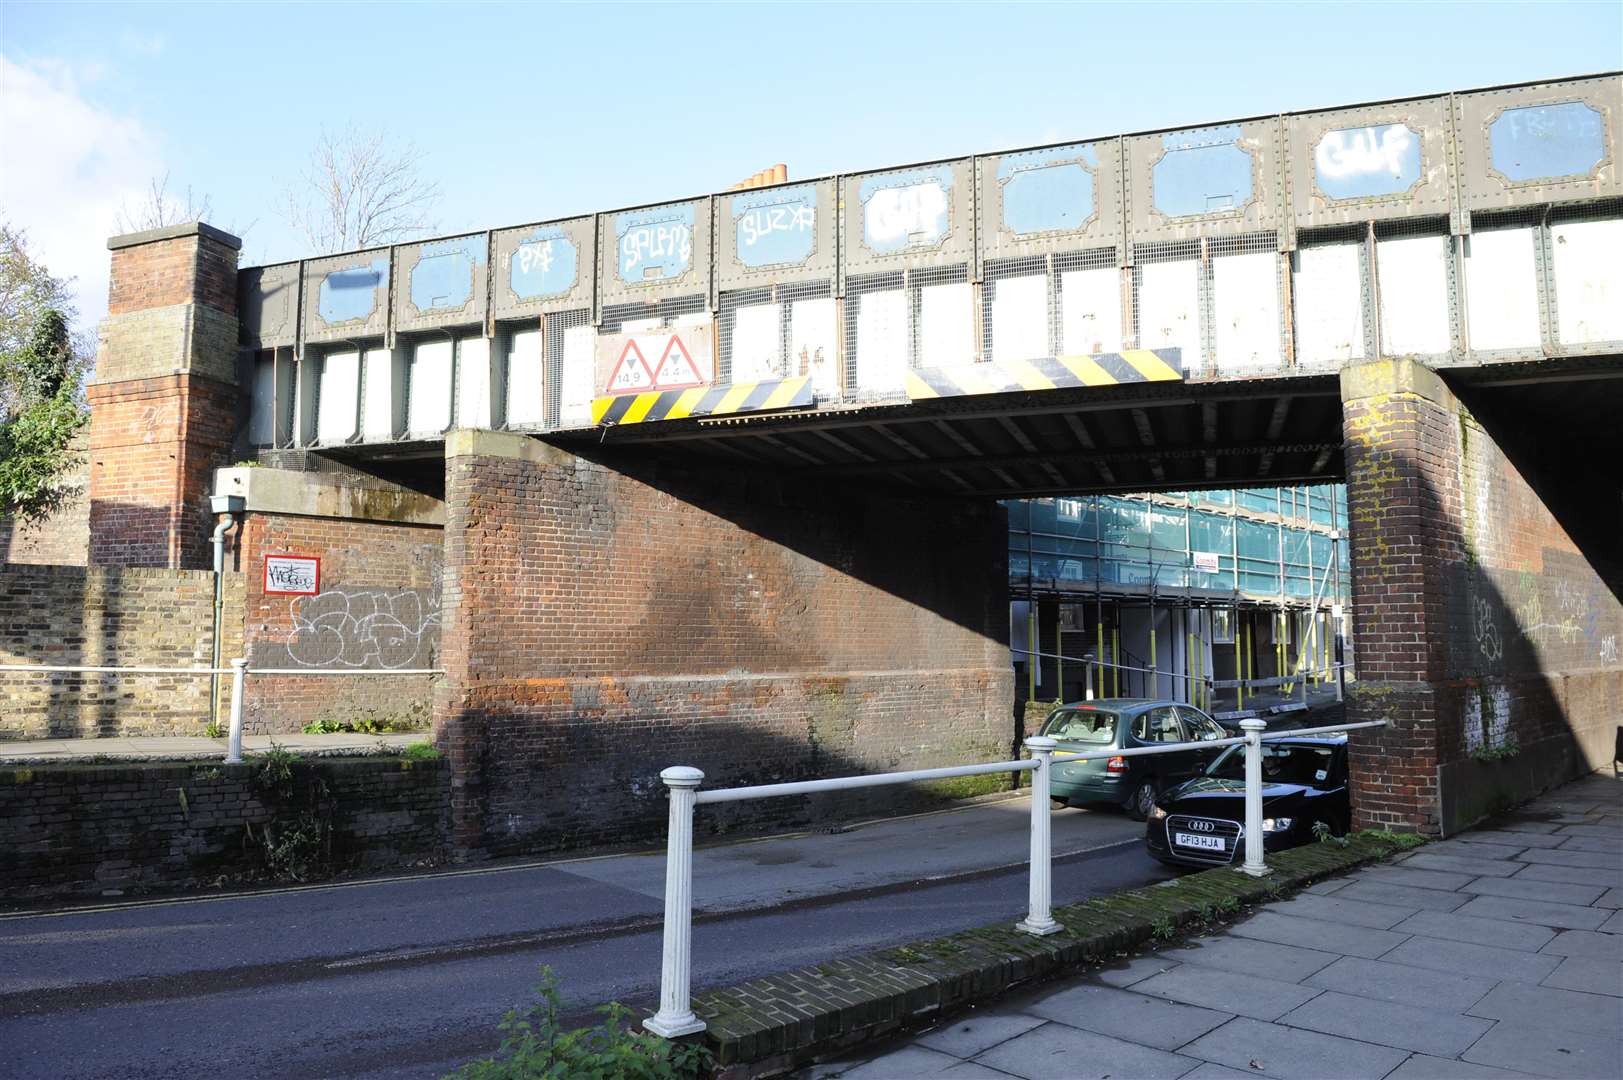 Repairs to the bridge will be carried out